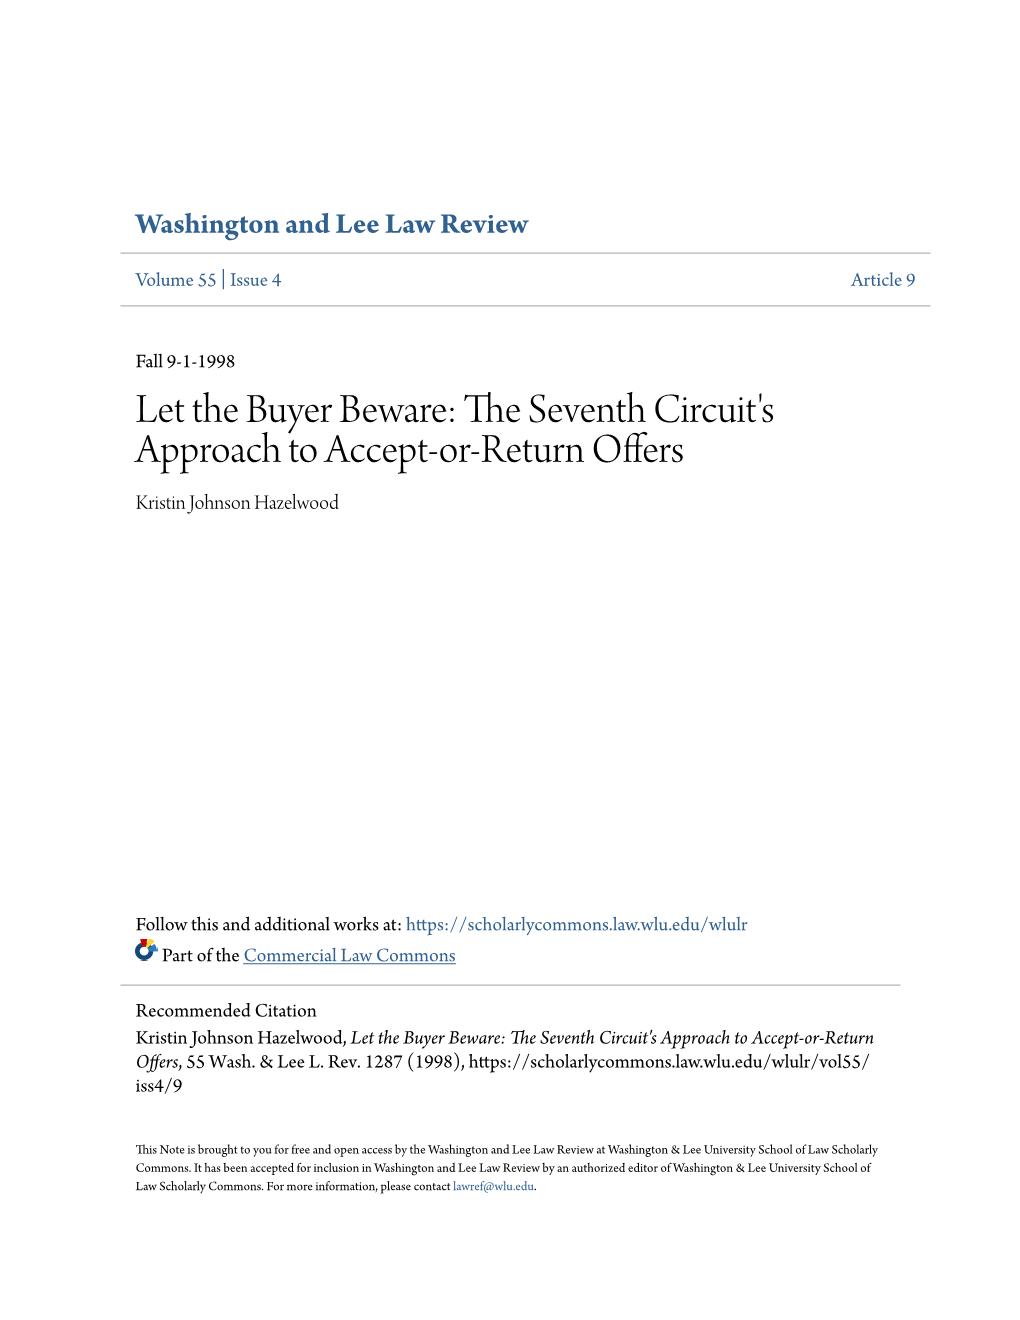 The Seventh Circuit's Approach to Accept-Or-Return Offers, 55 Wash